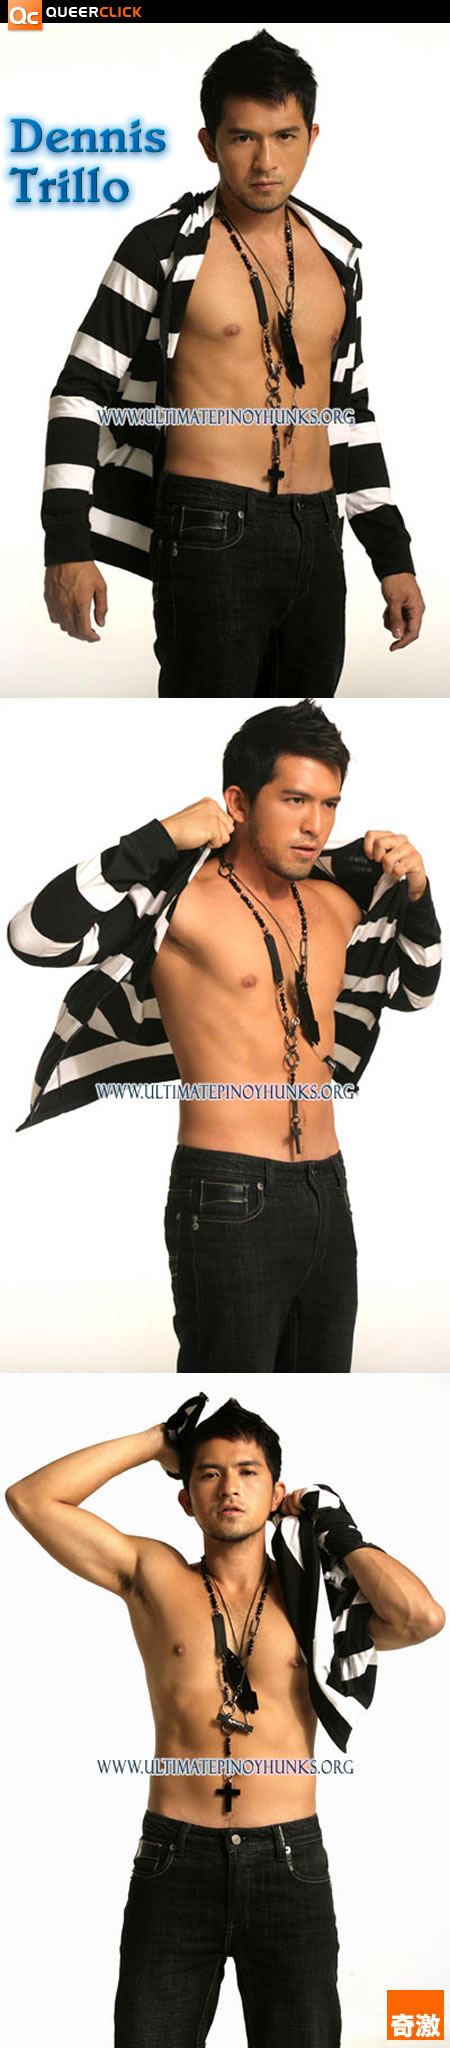 Dennis Trillo is Topless